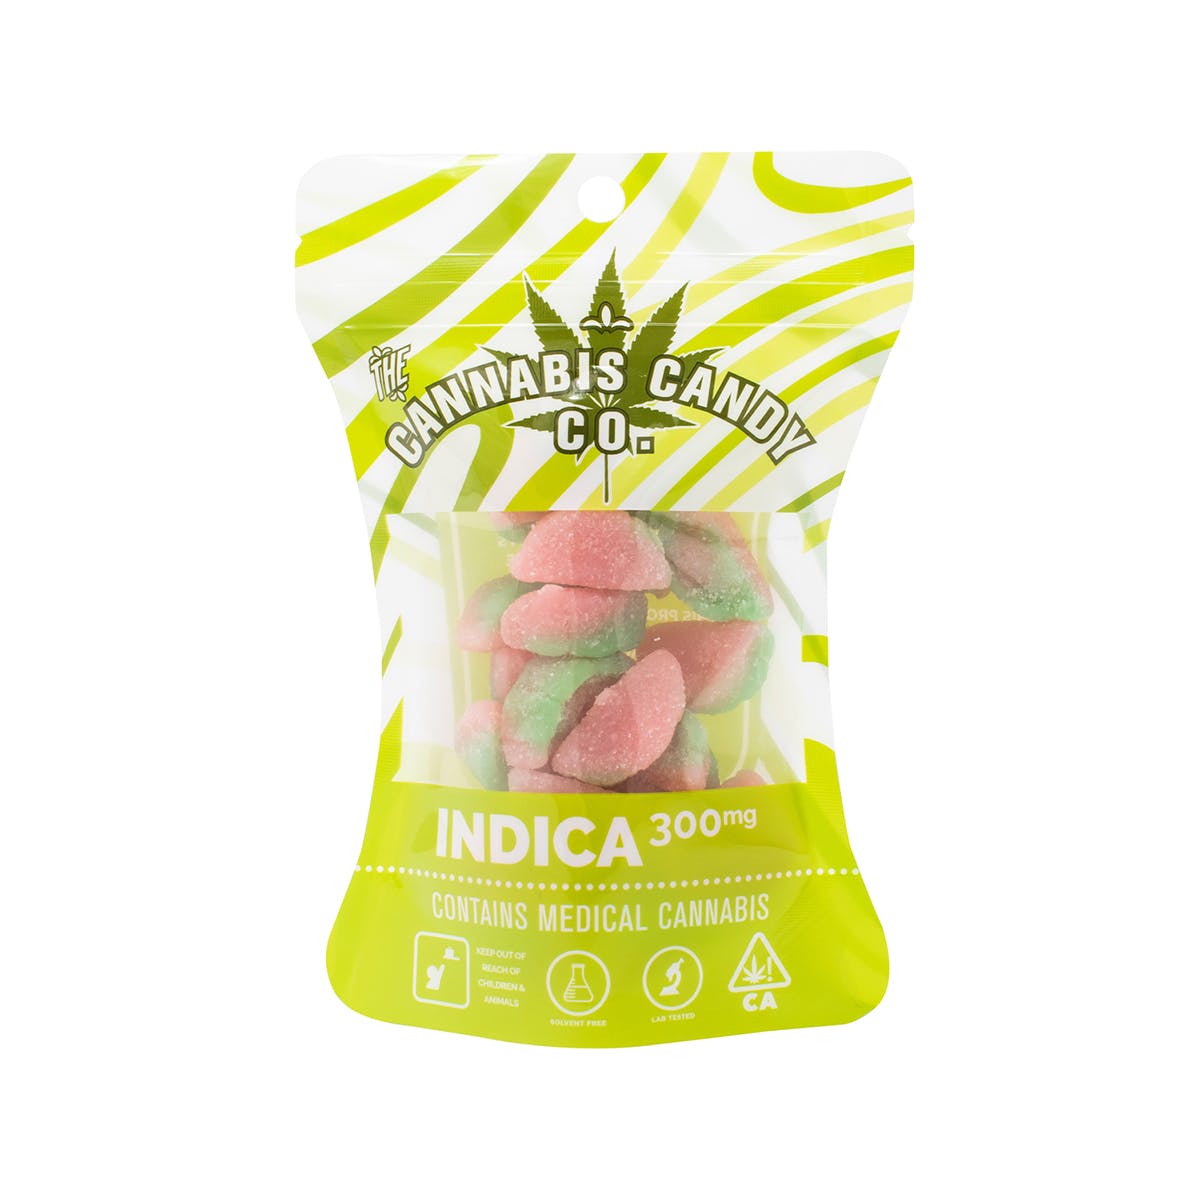 Watermelon Wedges - 300mg (Indica)